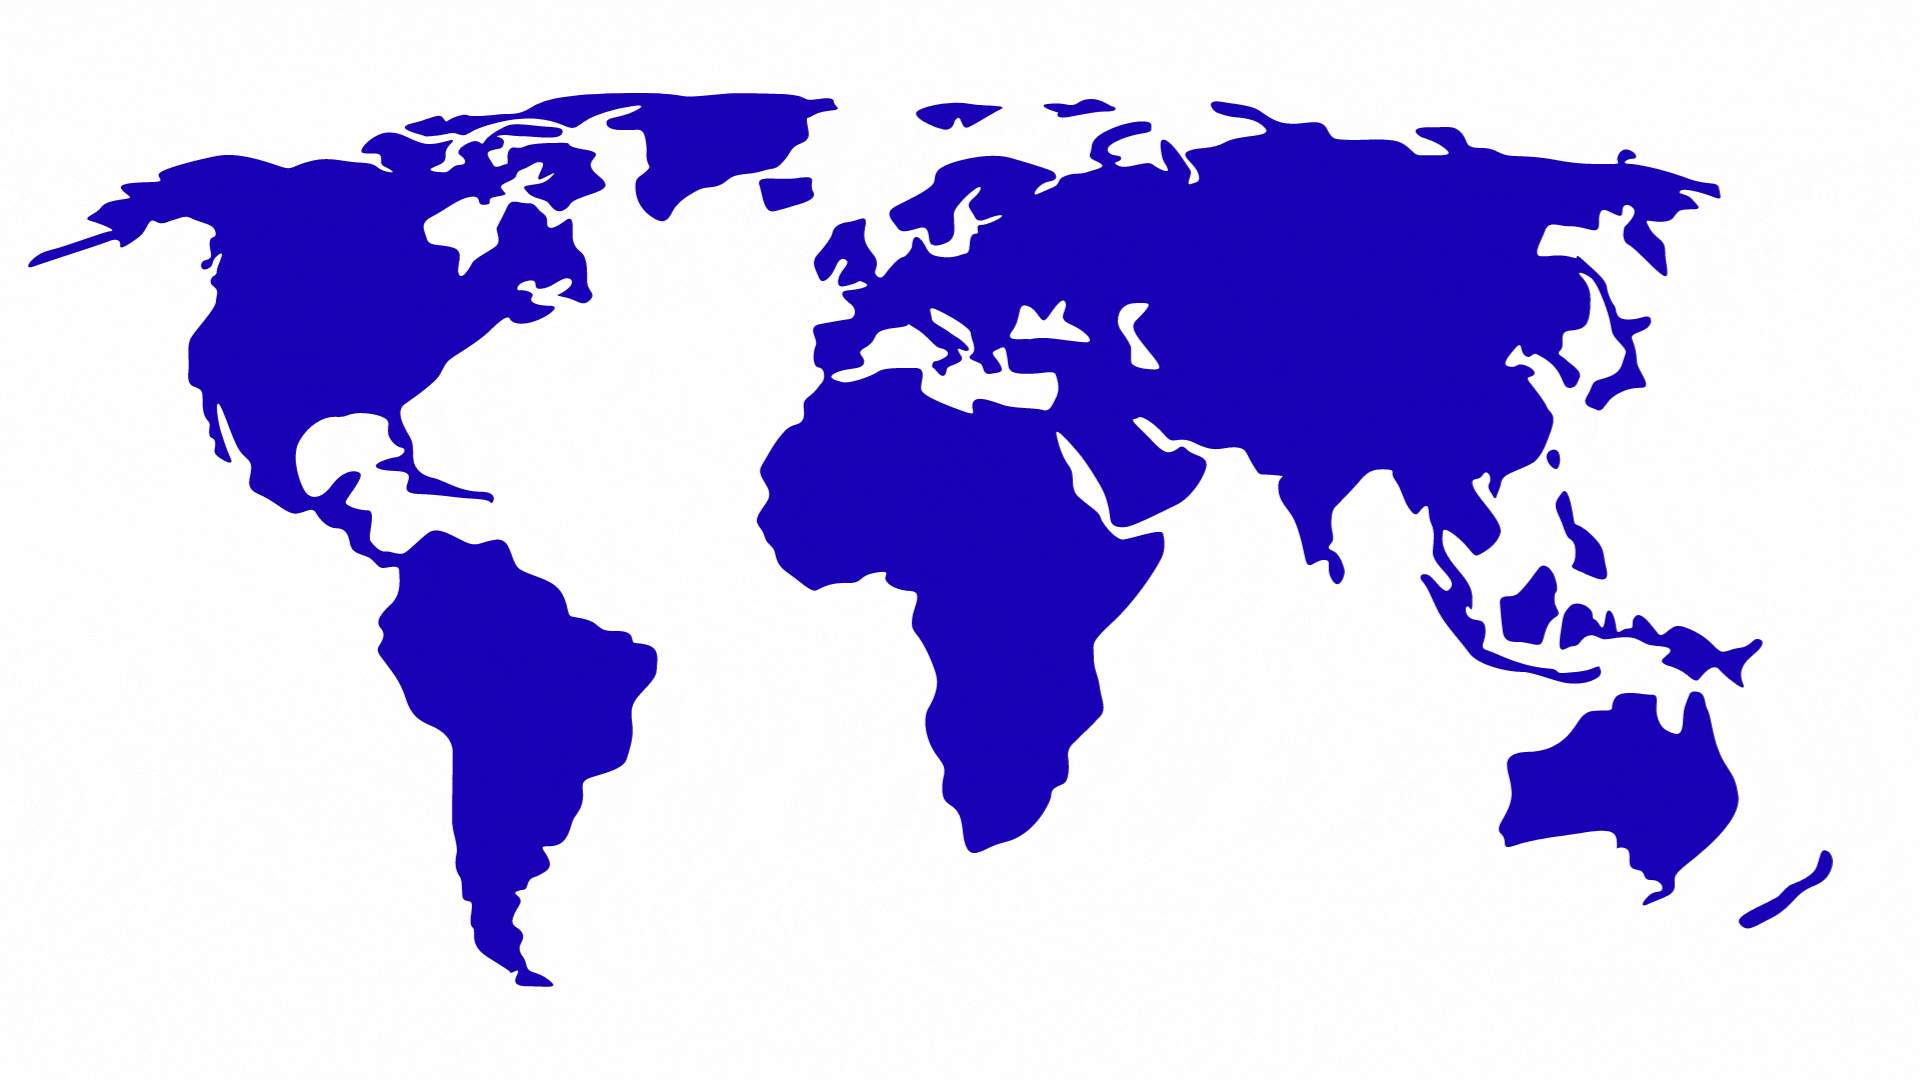 World map with pins for CIOB offices around the world